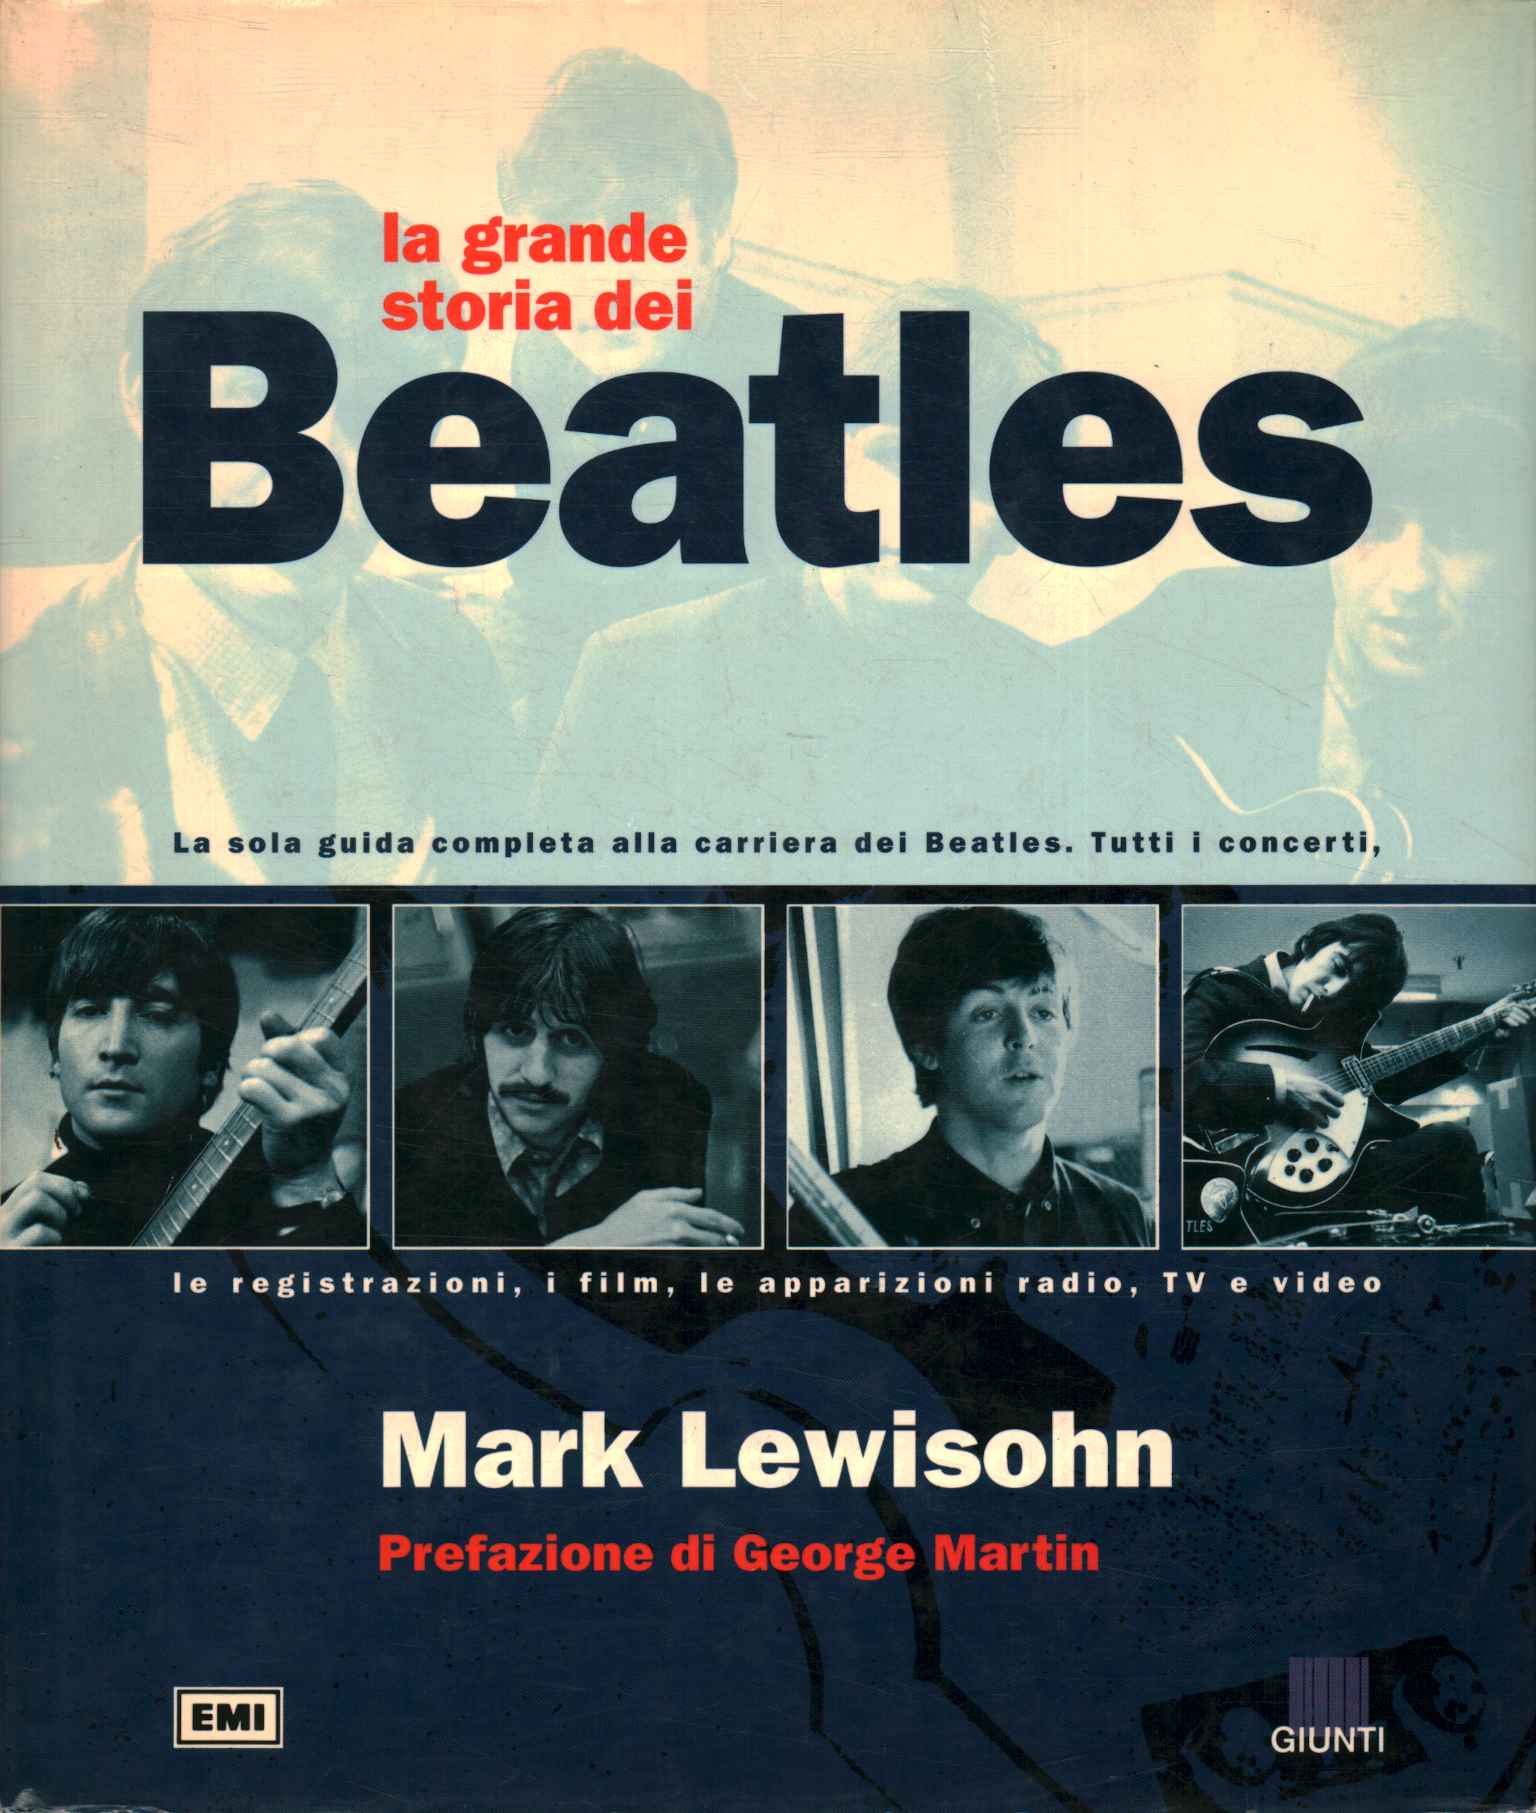 The great history of the Beatles